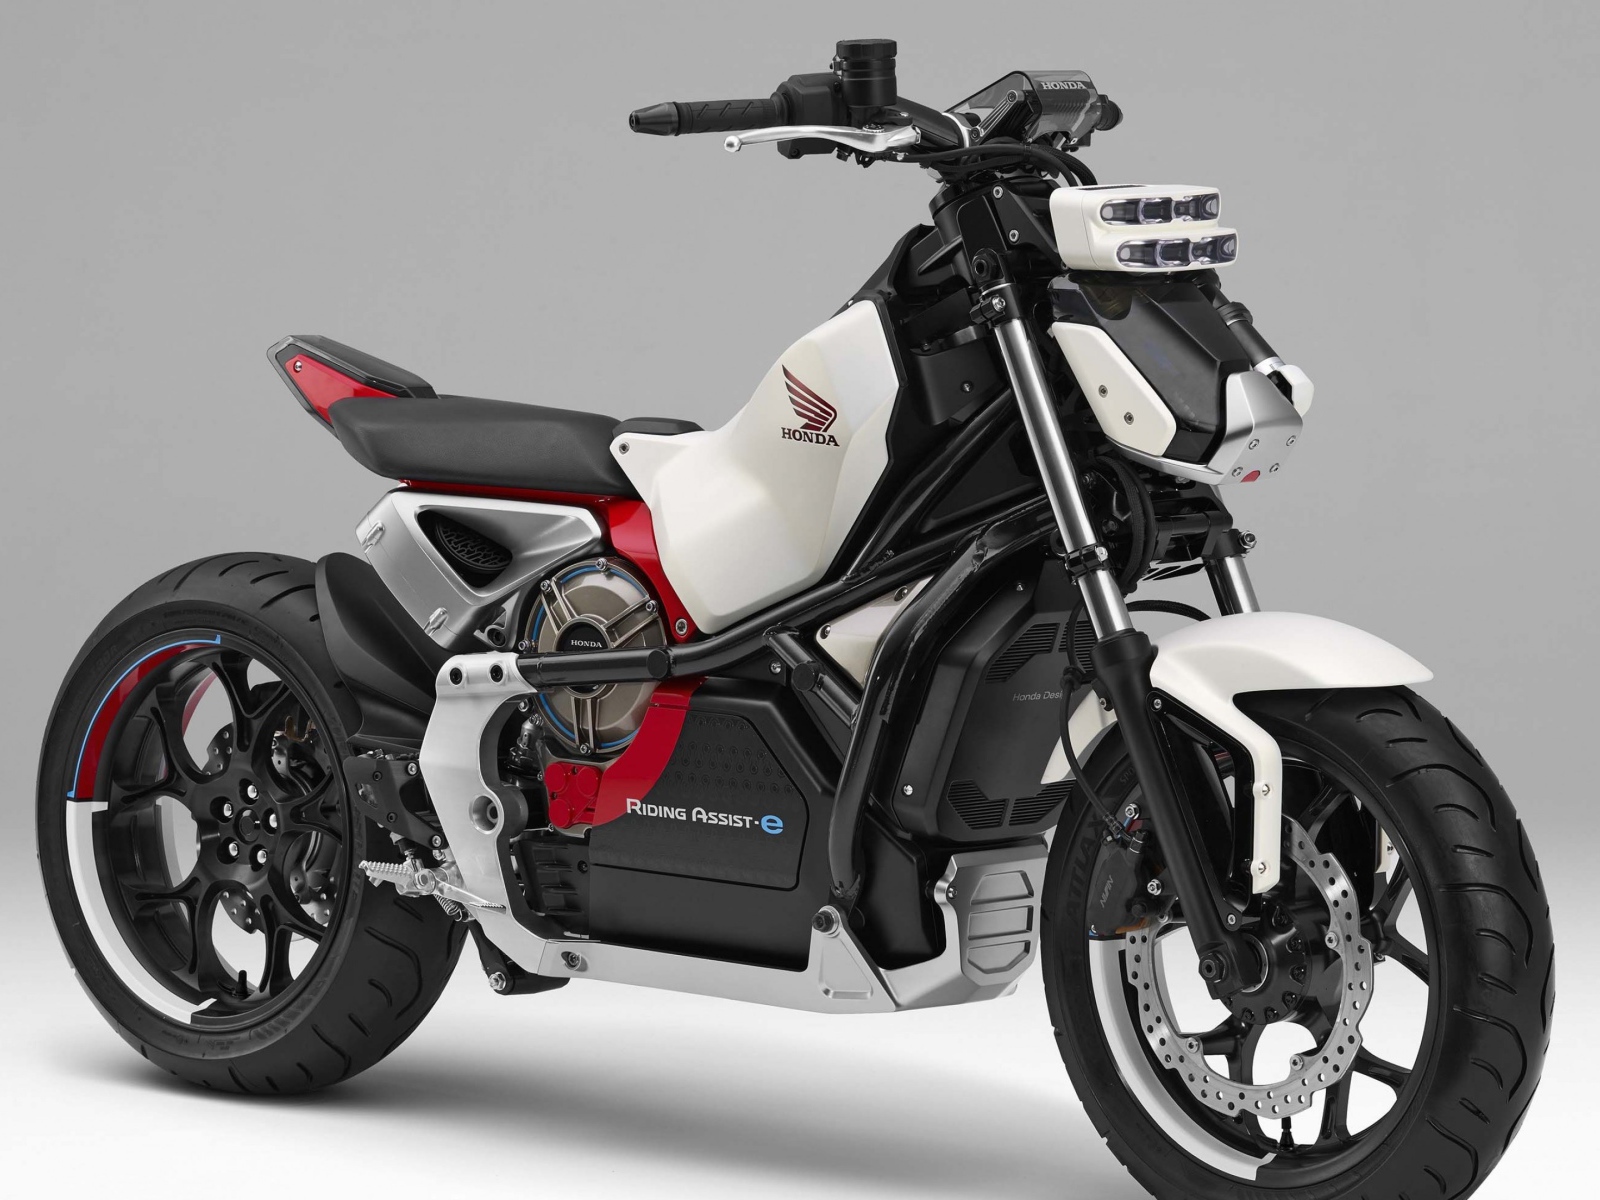 Fast motorcycle Honda Riding Assist-e Concept on a gray background